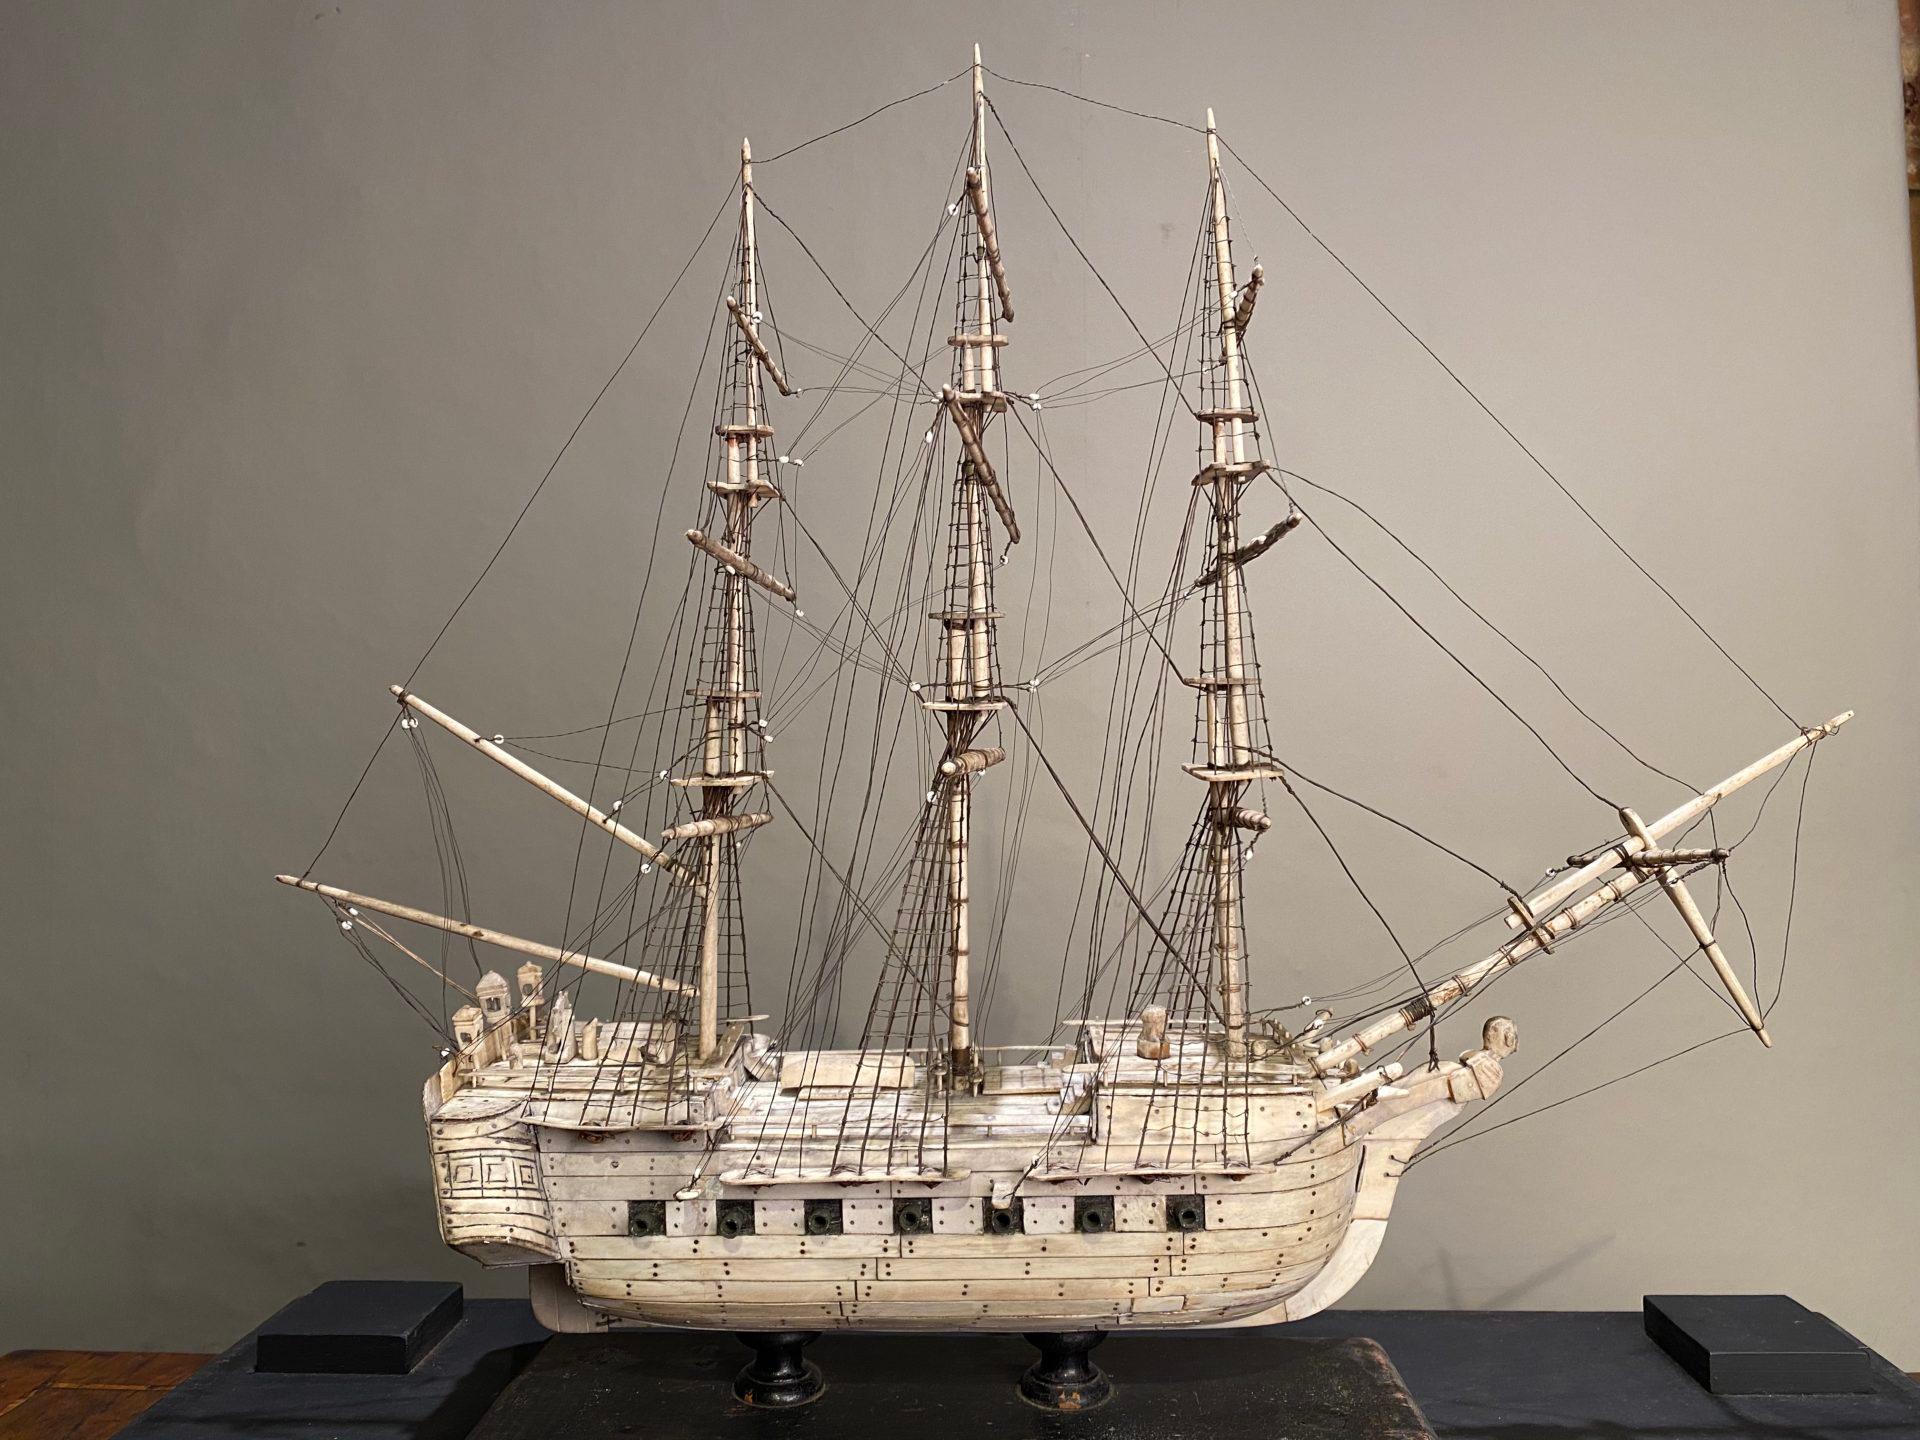 A Napoleonic prisoner-of-war model ship, ca 1815. In a glazed ebonized case.
In lovely condition throughout. 

This antique bone ship’s model was made by a prisoner of war during a long period of captivity - in the course of the Napoleonic Wars